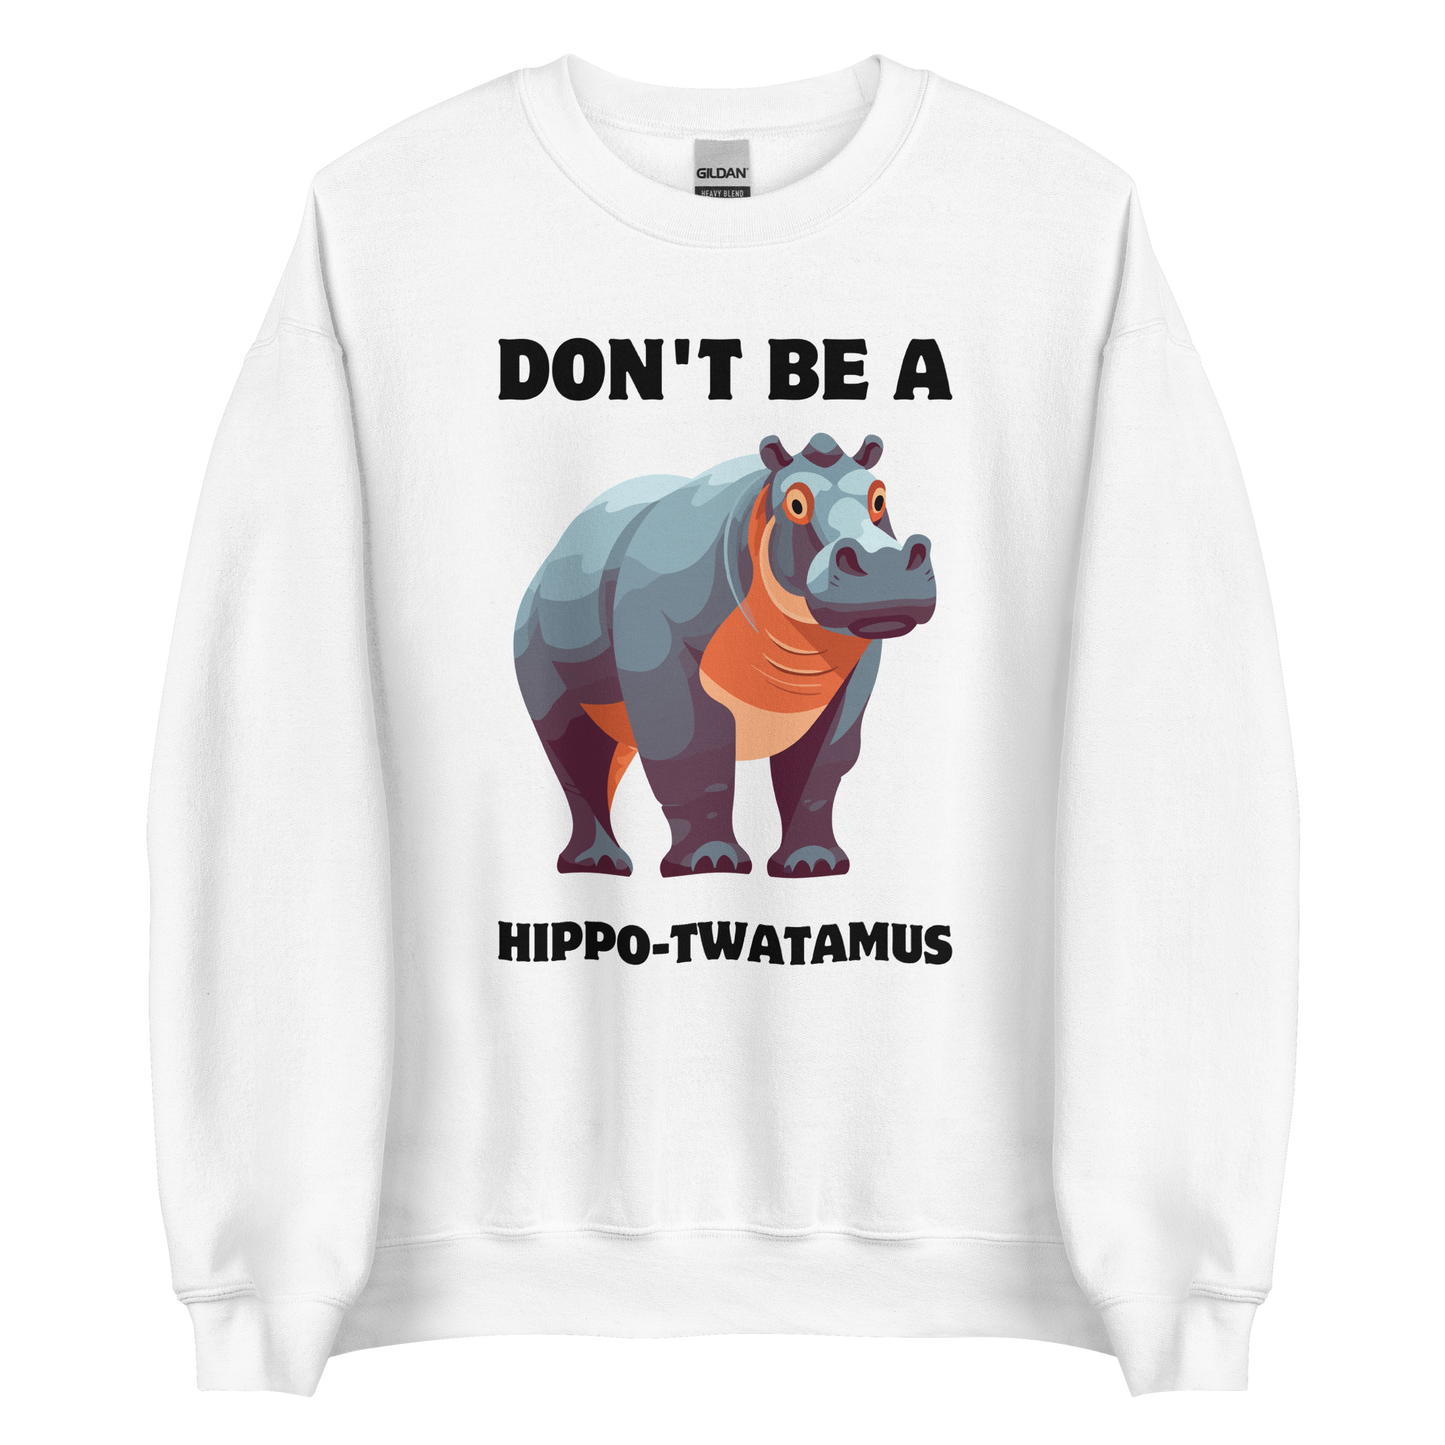 White Hippo Sweatshirt featuring a Don't Be a Hippo-Twatamus graphic on the chest - Funny Graphic Hippo Sweatshirts - Boozy Fox